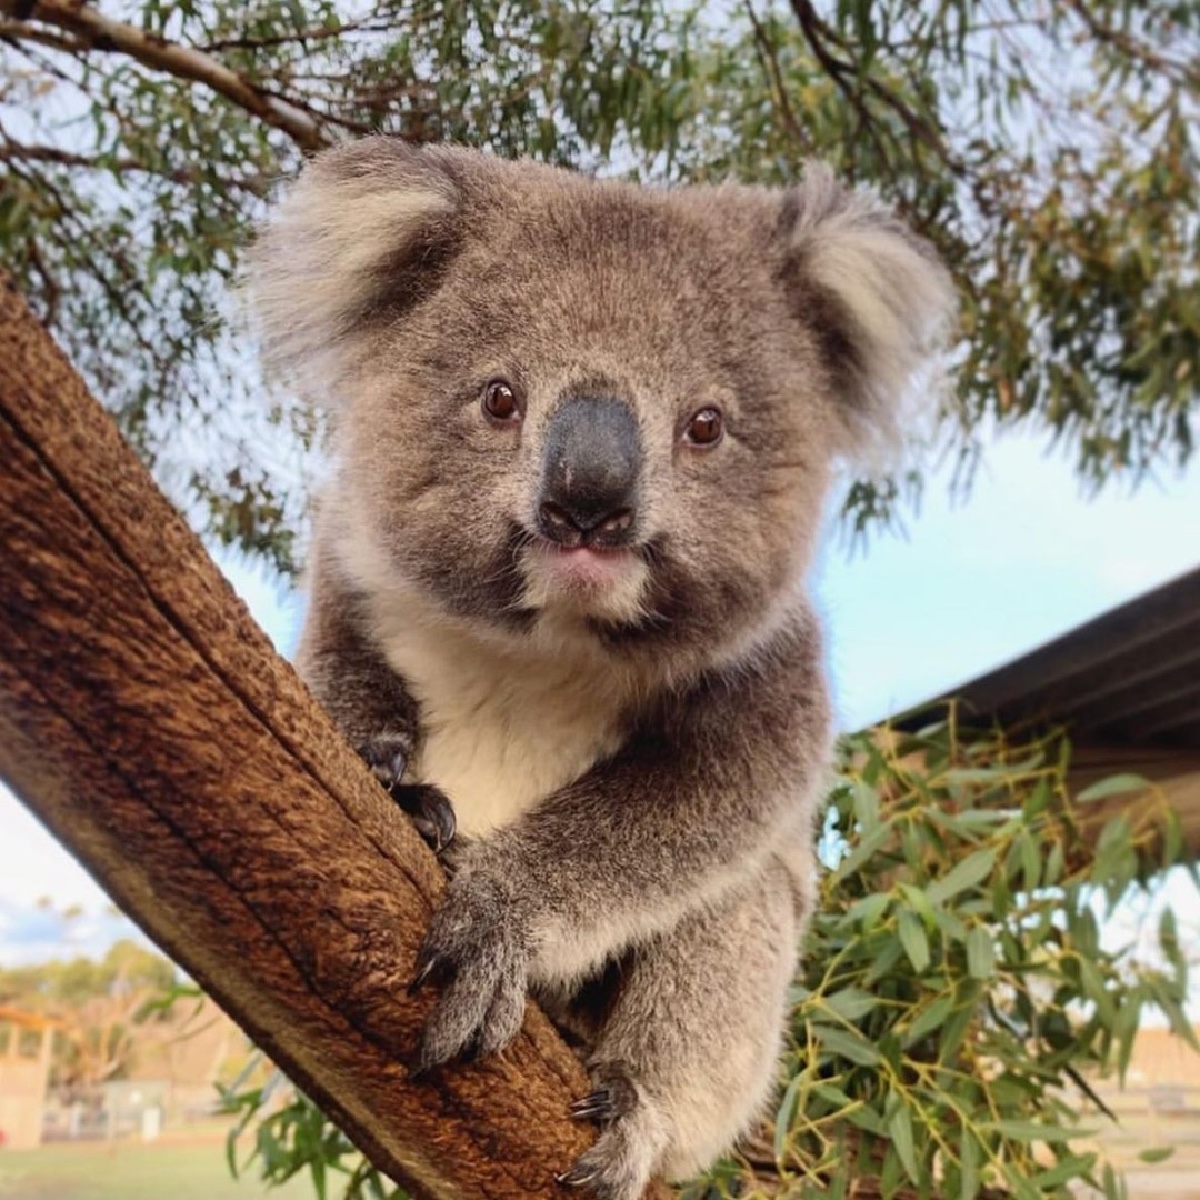 G'day, welcome to Glen Forest Tourist Park 🐨 

Located just a 15 minute drive from #PortLincoln, this is a must-do when visiting @southaustralia's #EyrePeninsula. 

#seeaustralia #comeandsaygday